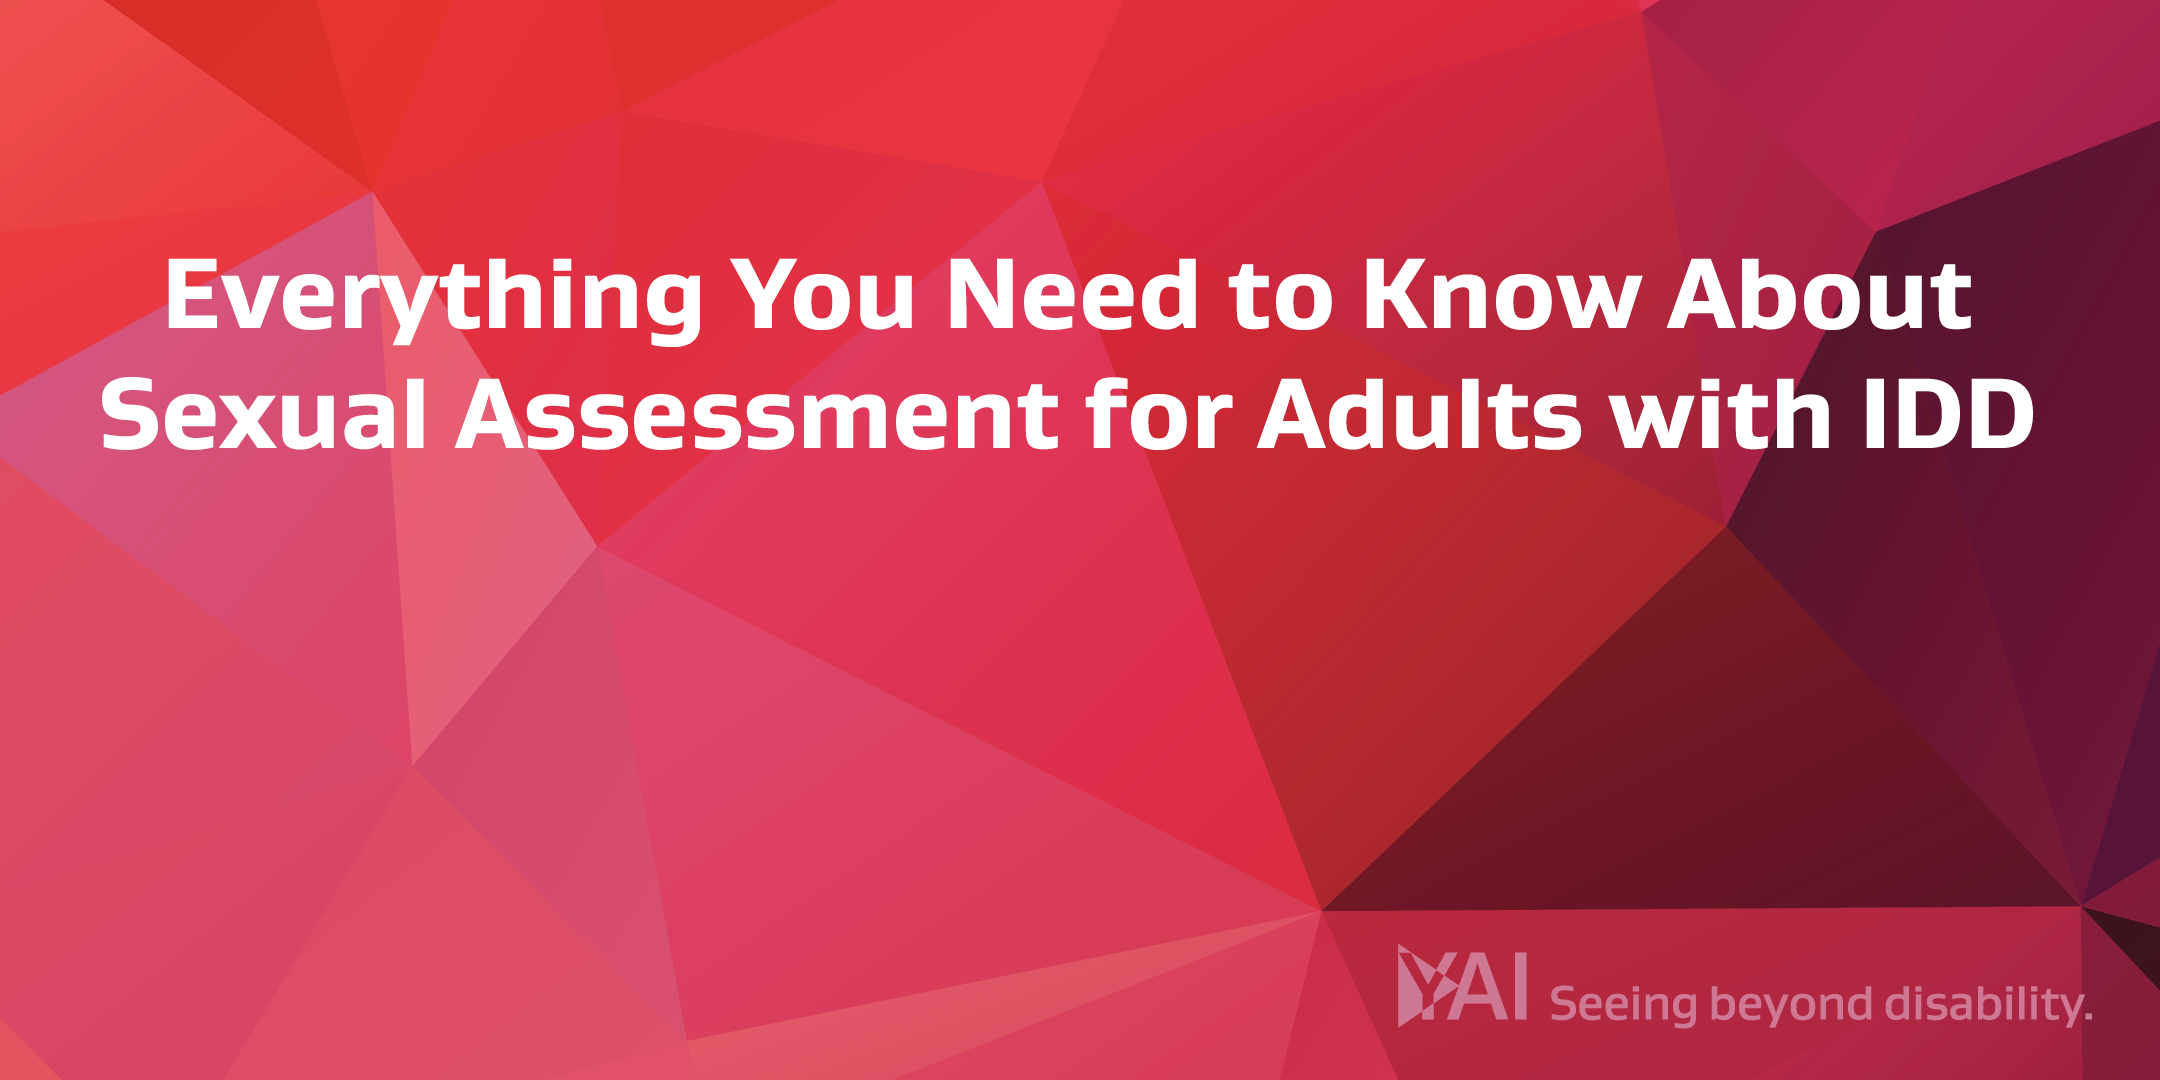 Everything You Need to Know About Sexual Assessment for Adults with IDD